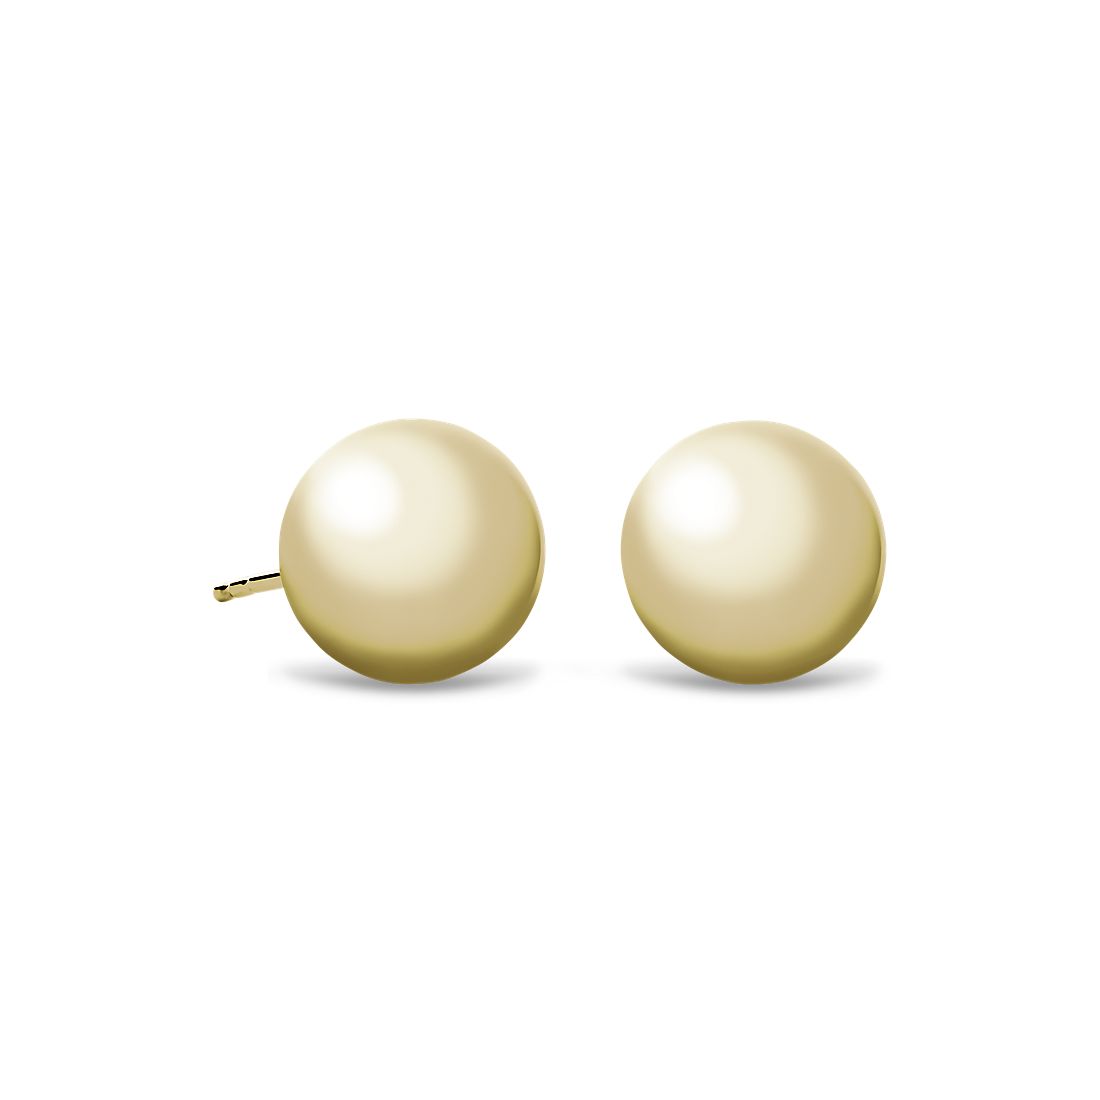 14K Solid Yellow Gold Ball Earrings 10 mm With Genuine 14K Gold Push backs 